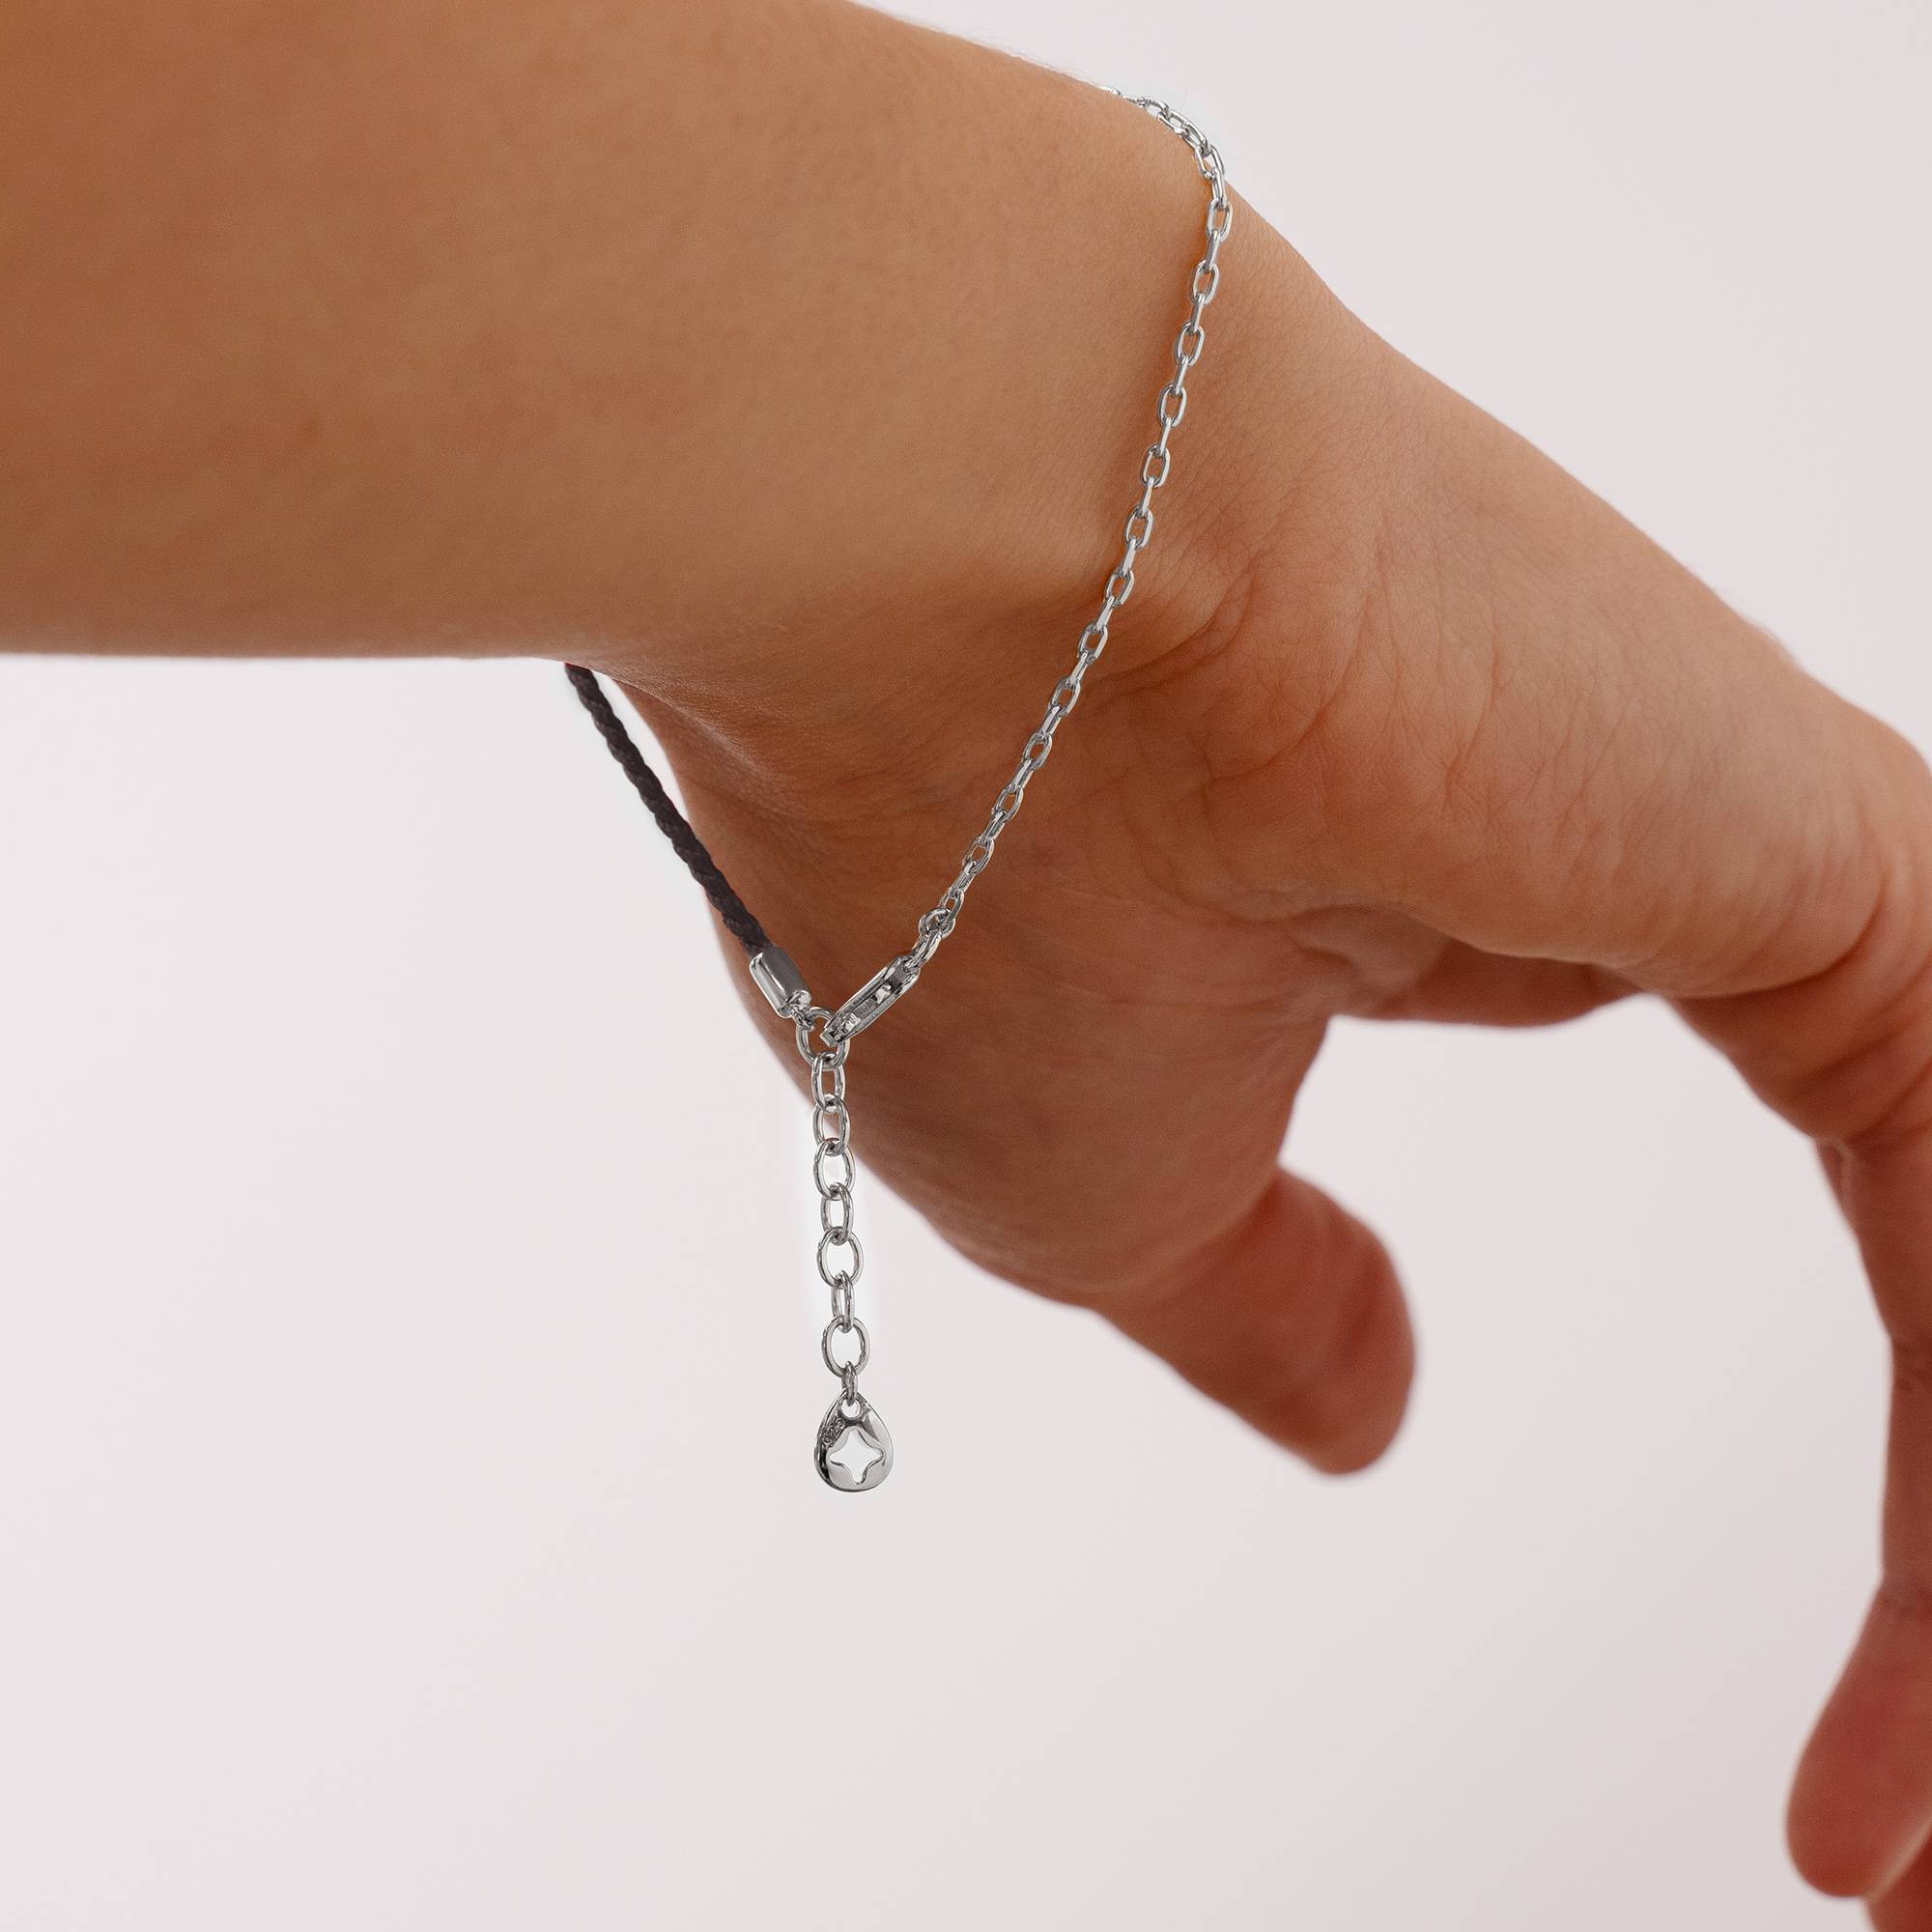 Half and Half Black Initial Bracelet with Diamond in Sterling Silver-3 product photo